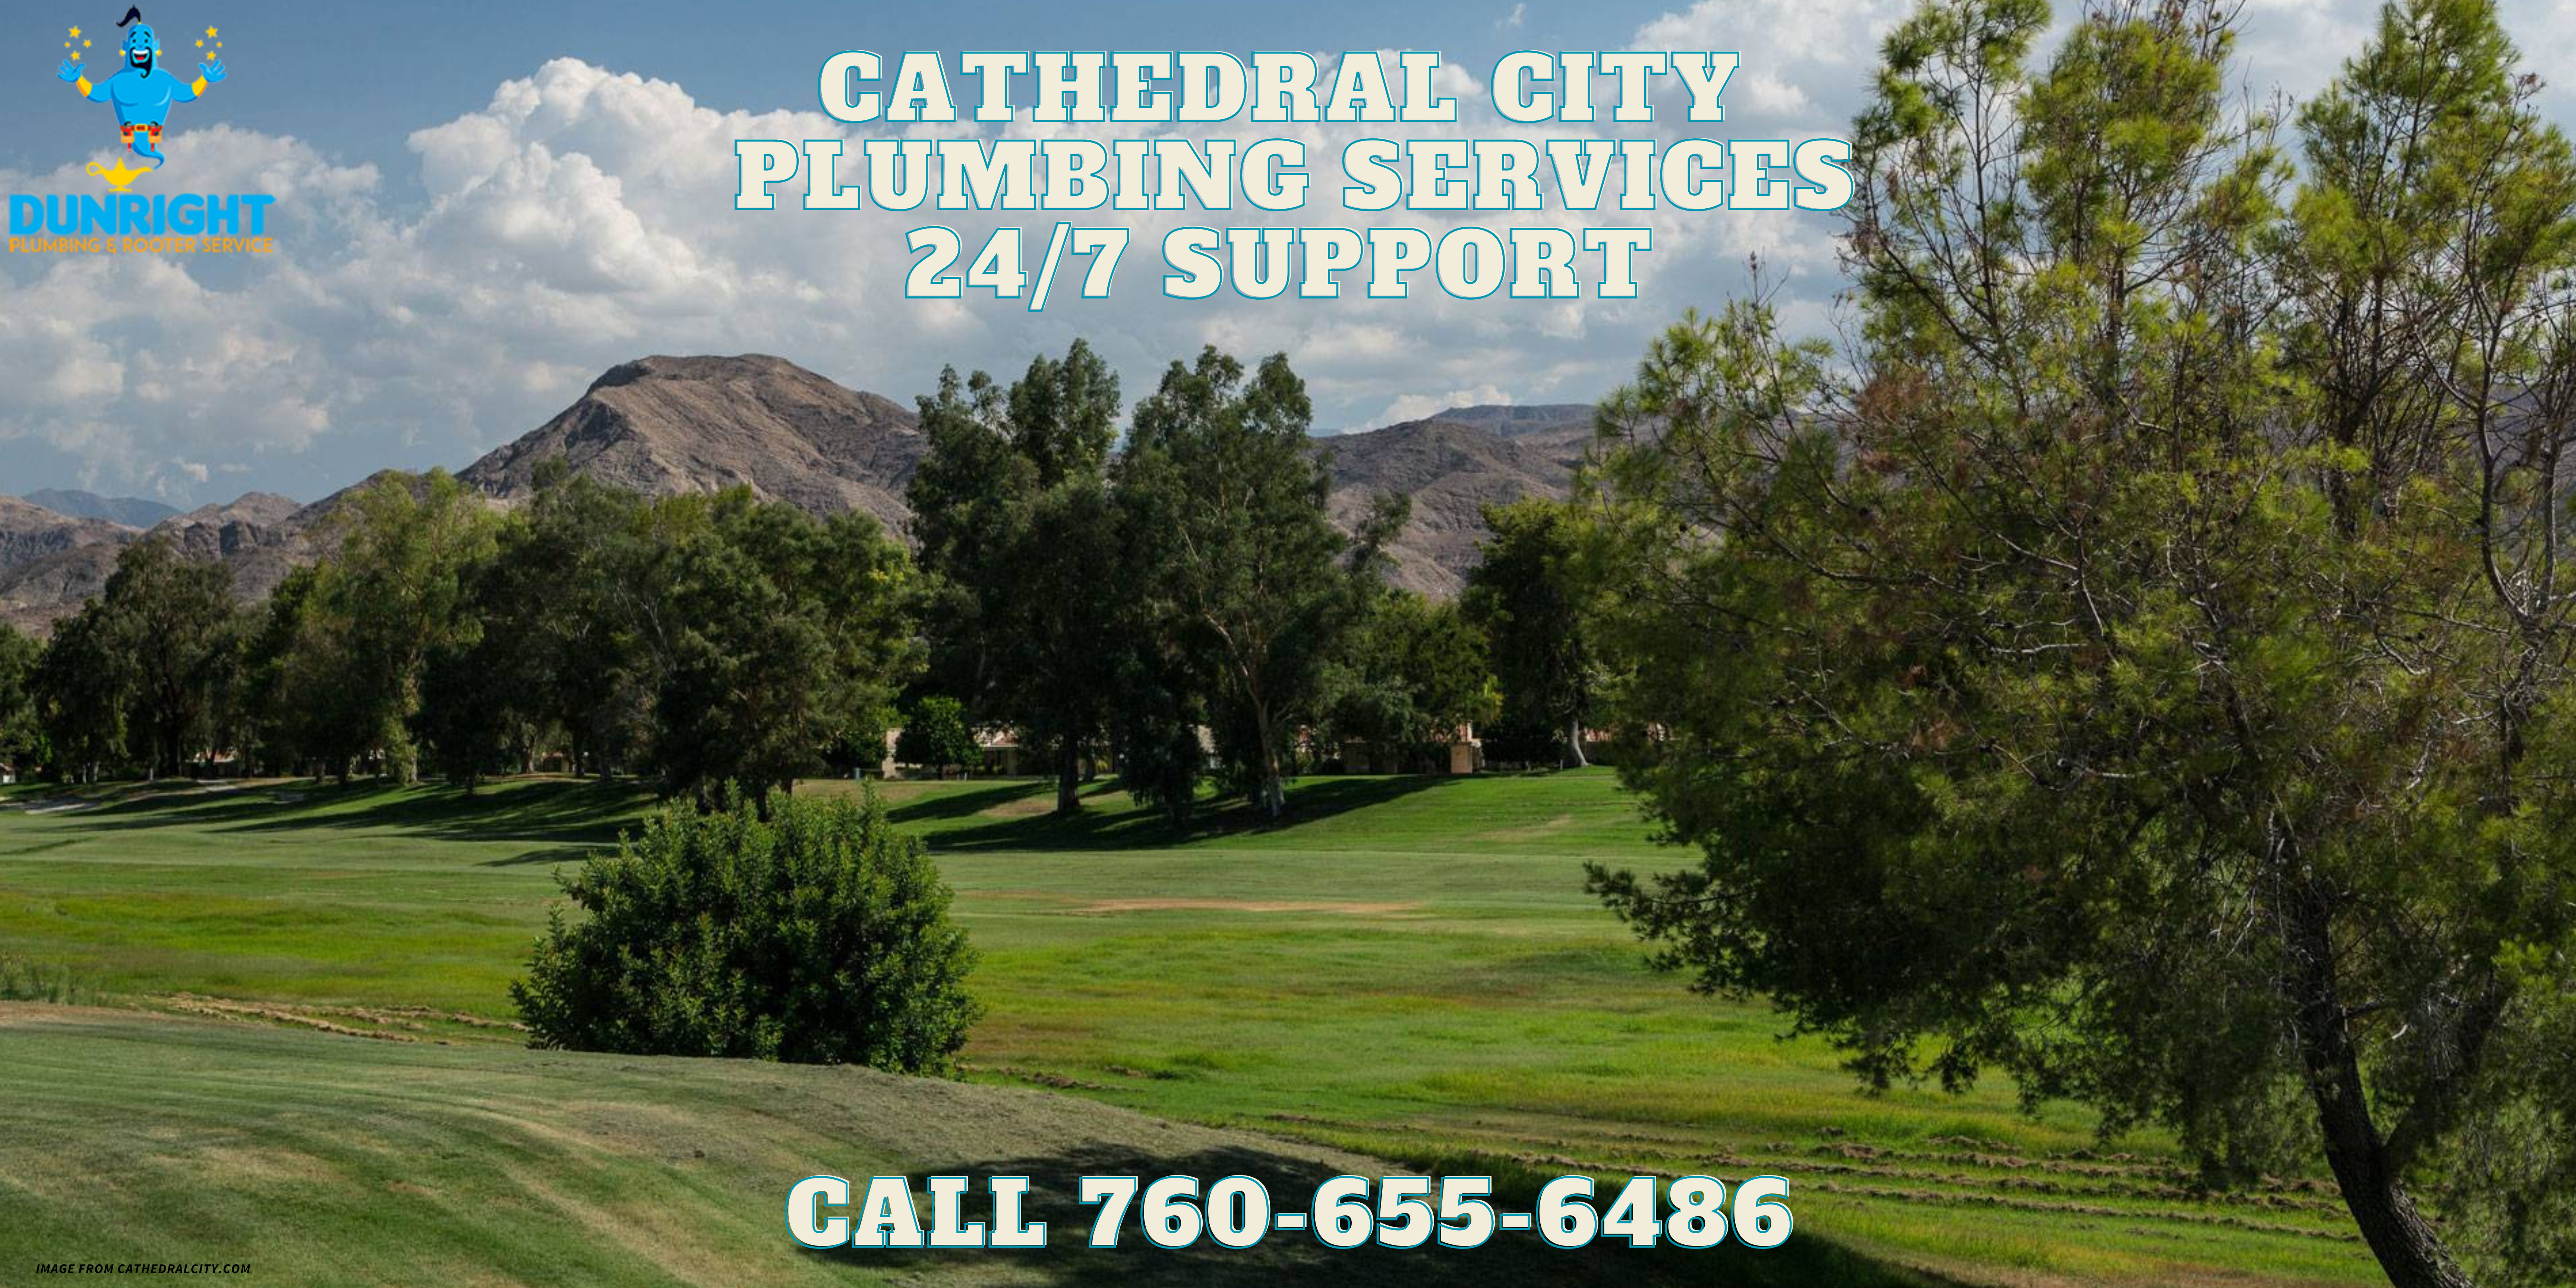 Cathedral City Plumbing Services